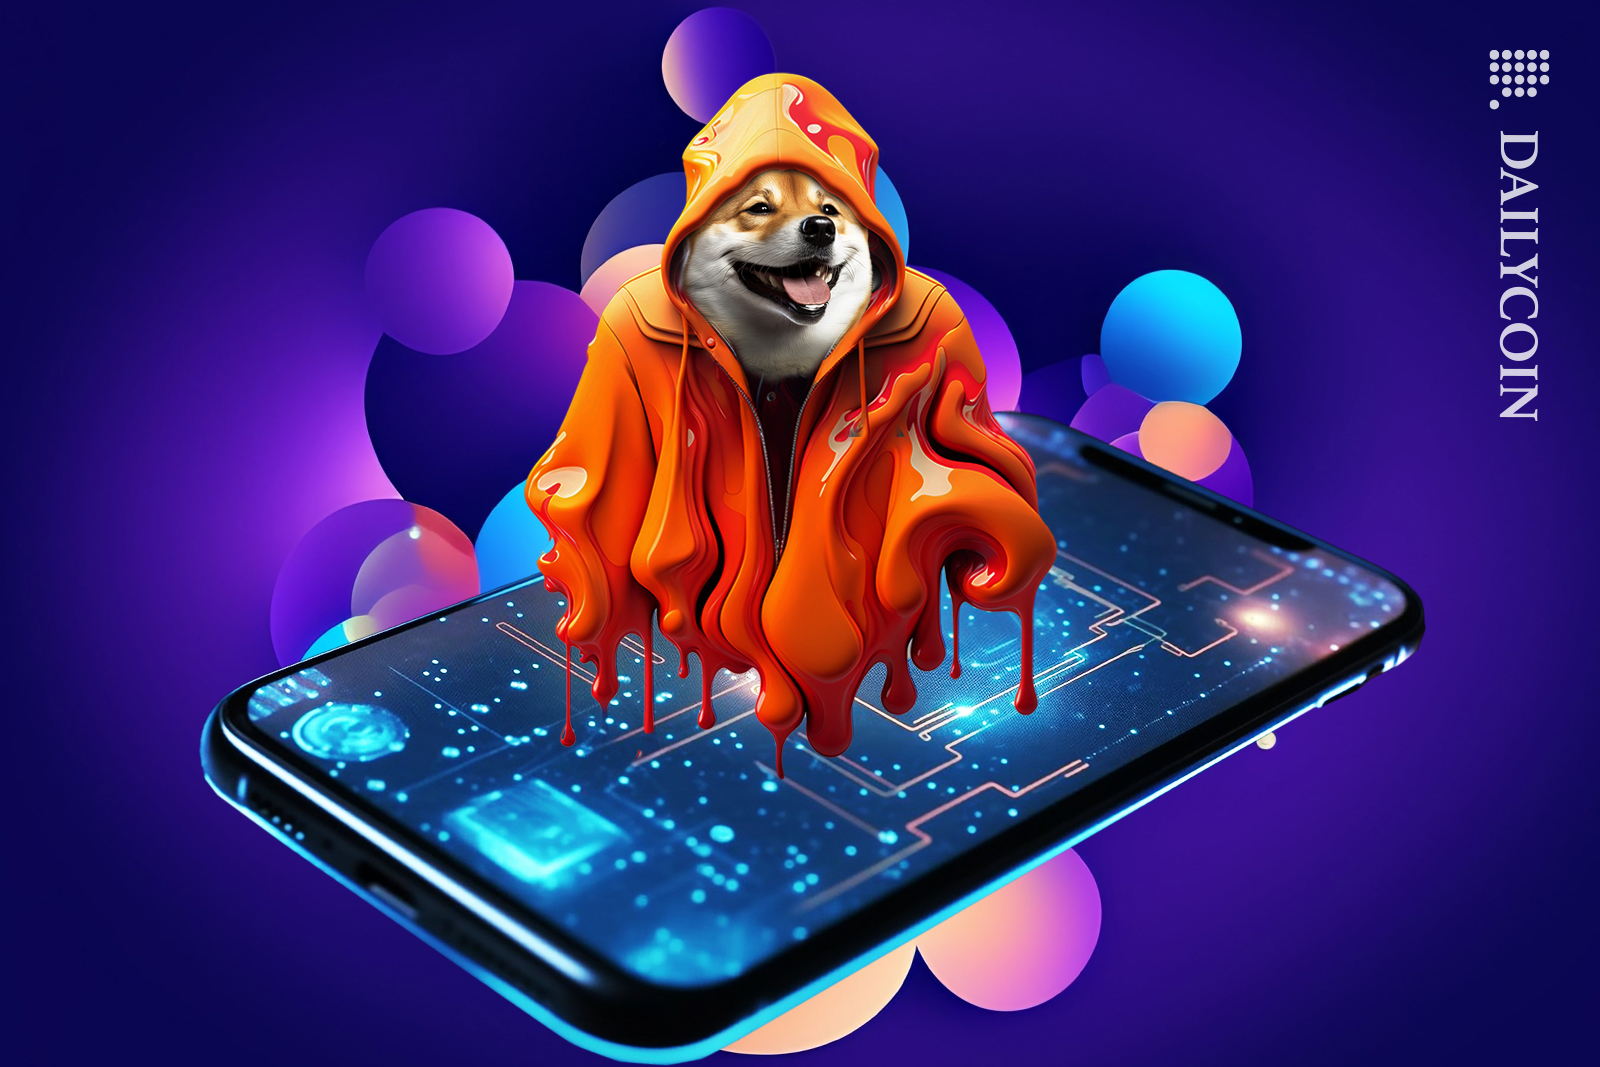 Shiba Inu wearing an orange hoodie on a DeFi technology mobile with bubbles behind him.